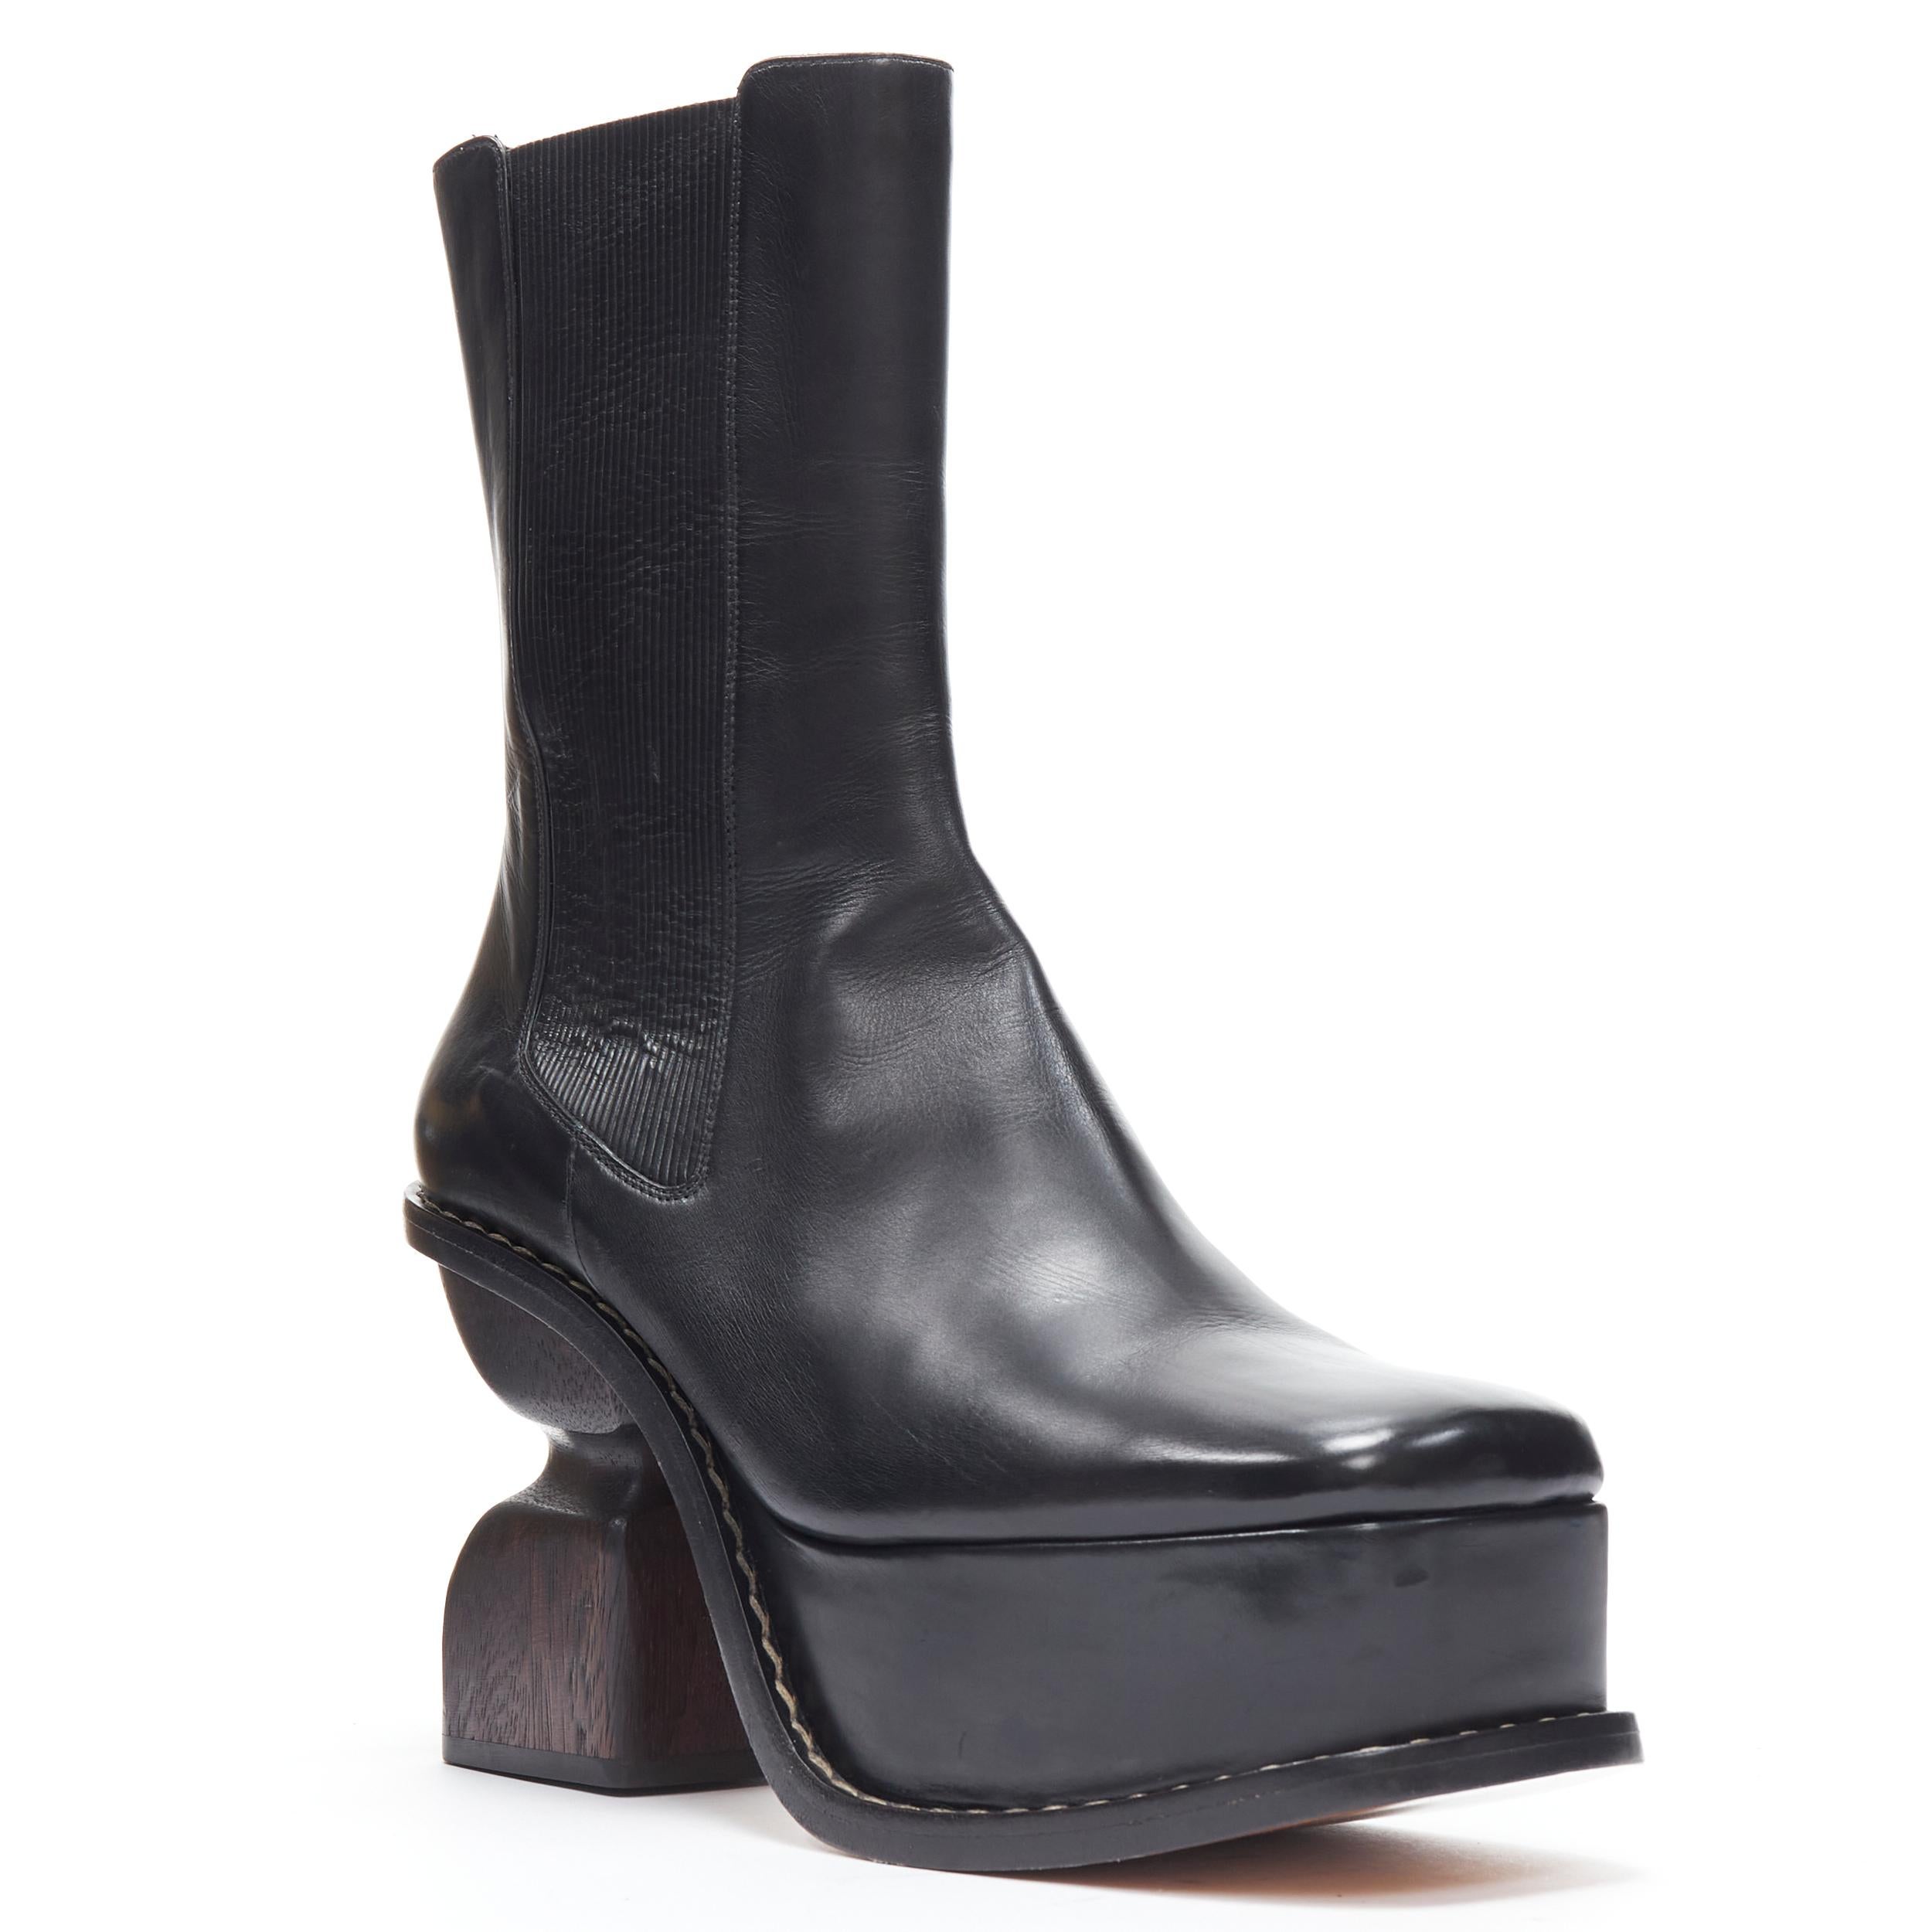 new LOEWE Runway sculpted wooden heel platform square toe ankel boot EU39 
Reference: TGAS/B01323 
Brand: Loewe 
Designer: JW Anderson 
Material: Leather 
Color: Black 
Pattern: Solid 
Closure: Stretch 
Extra Detail: Stretch leather gusset. Square